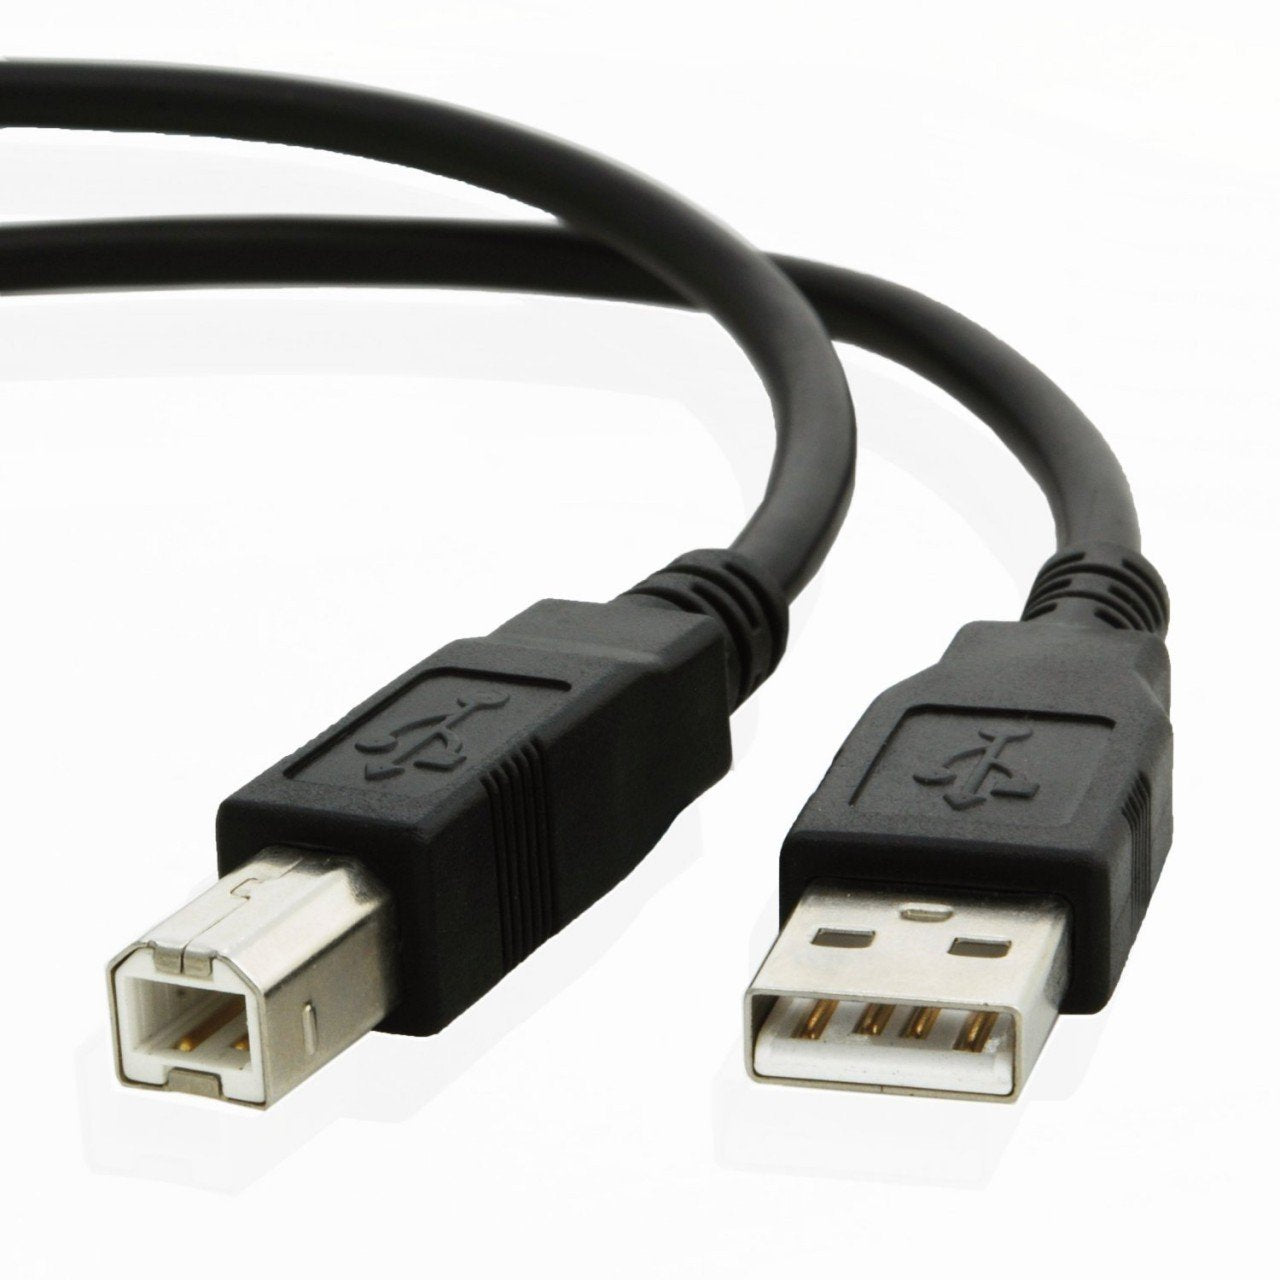 USB cable for Epson SURECOLOR P20000